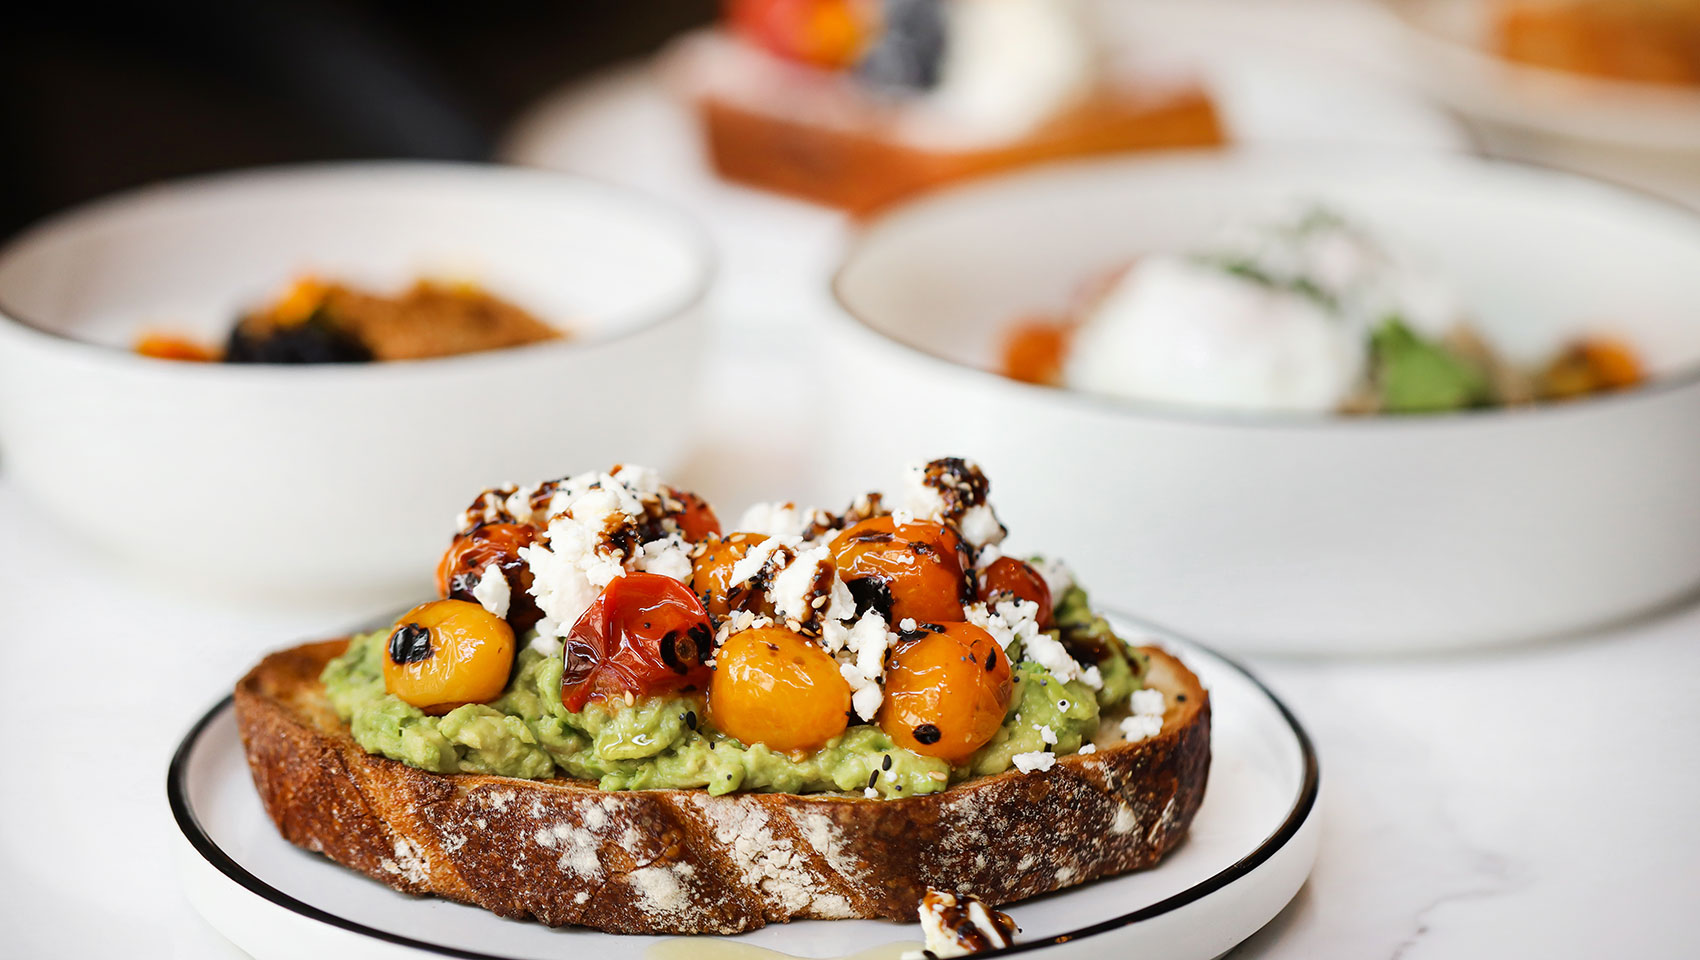 Avocado toast with toppings on plate